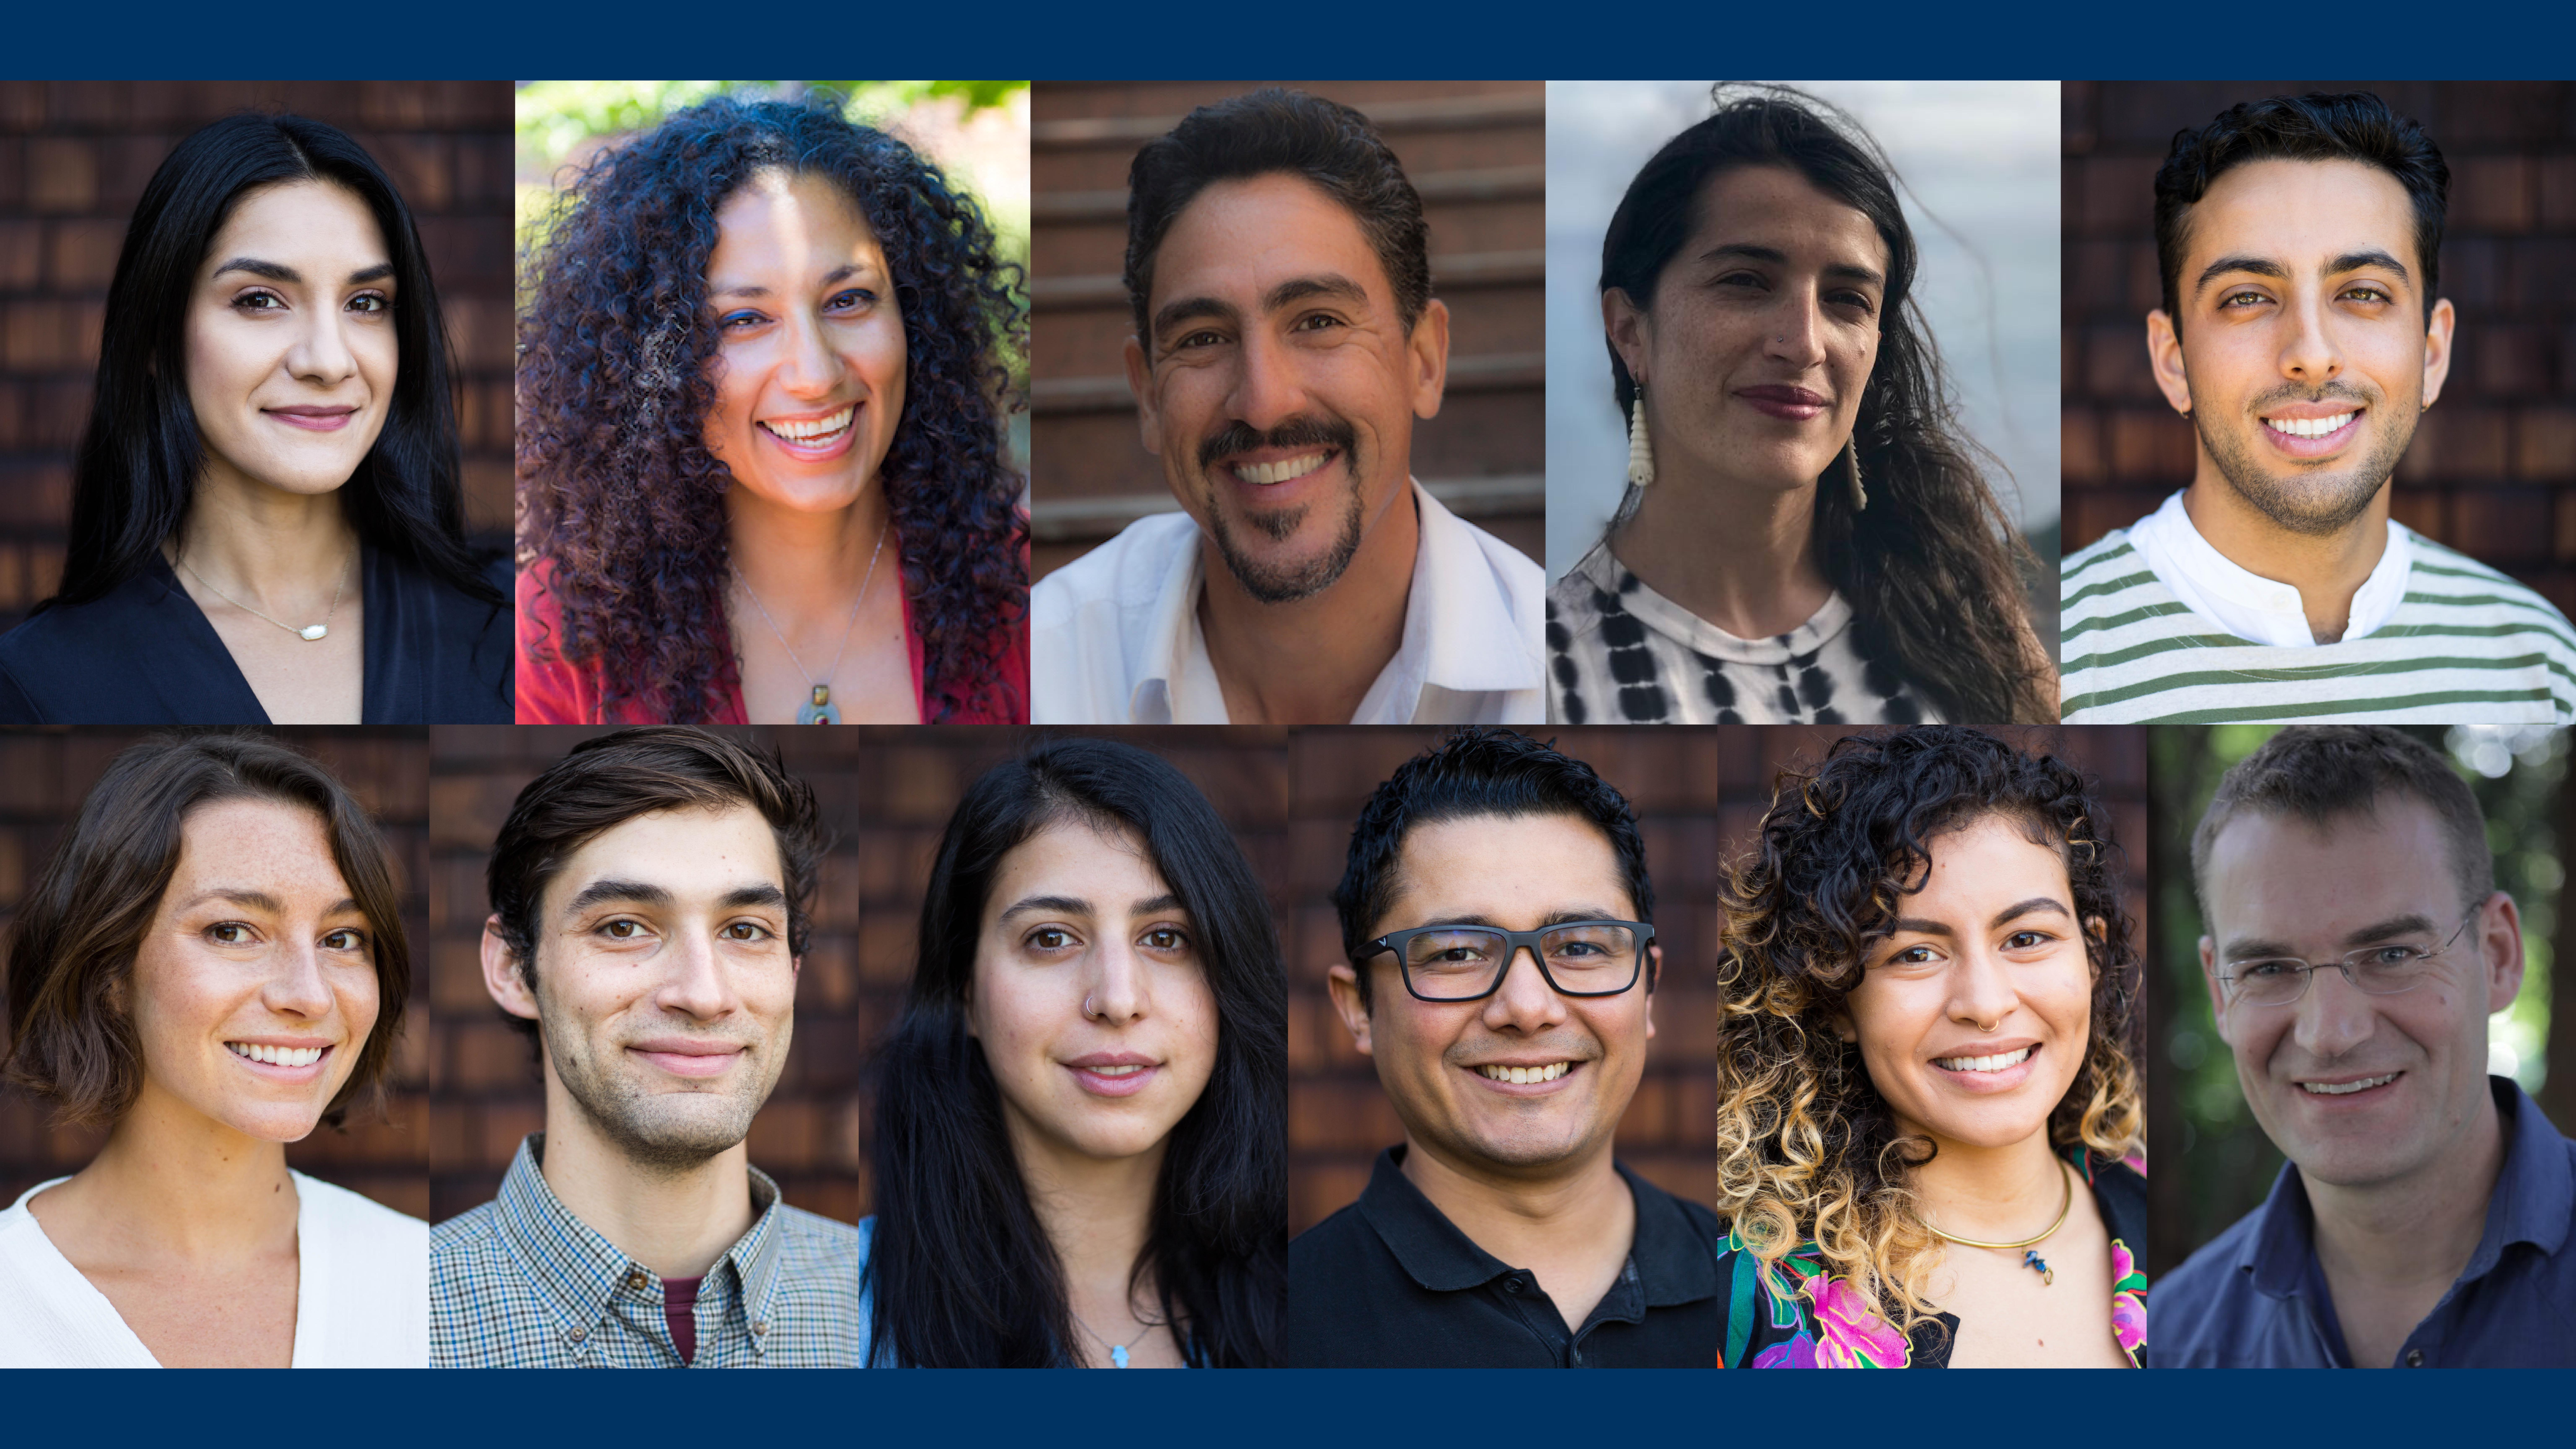 A diverse group of eleven people, including six women and five men, smiling at the camera. They are positioned in two rows against a blurred, outdoor background. With distinct features and expressions, they showcase a range of ethnic backgrounds—an embodiment of the Berkeley Journalism community.